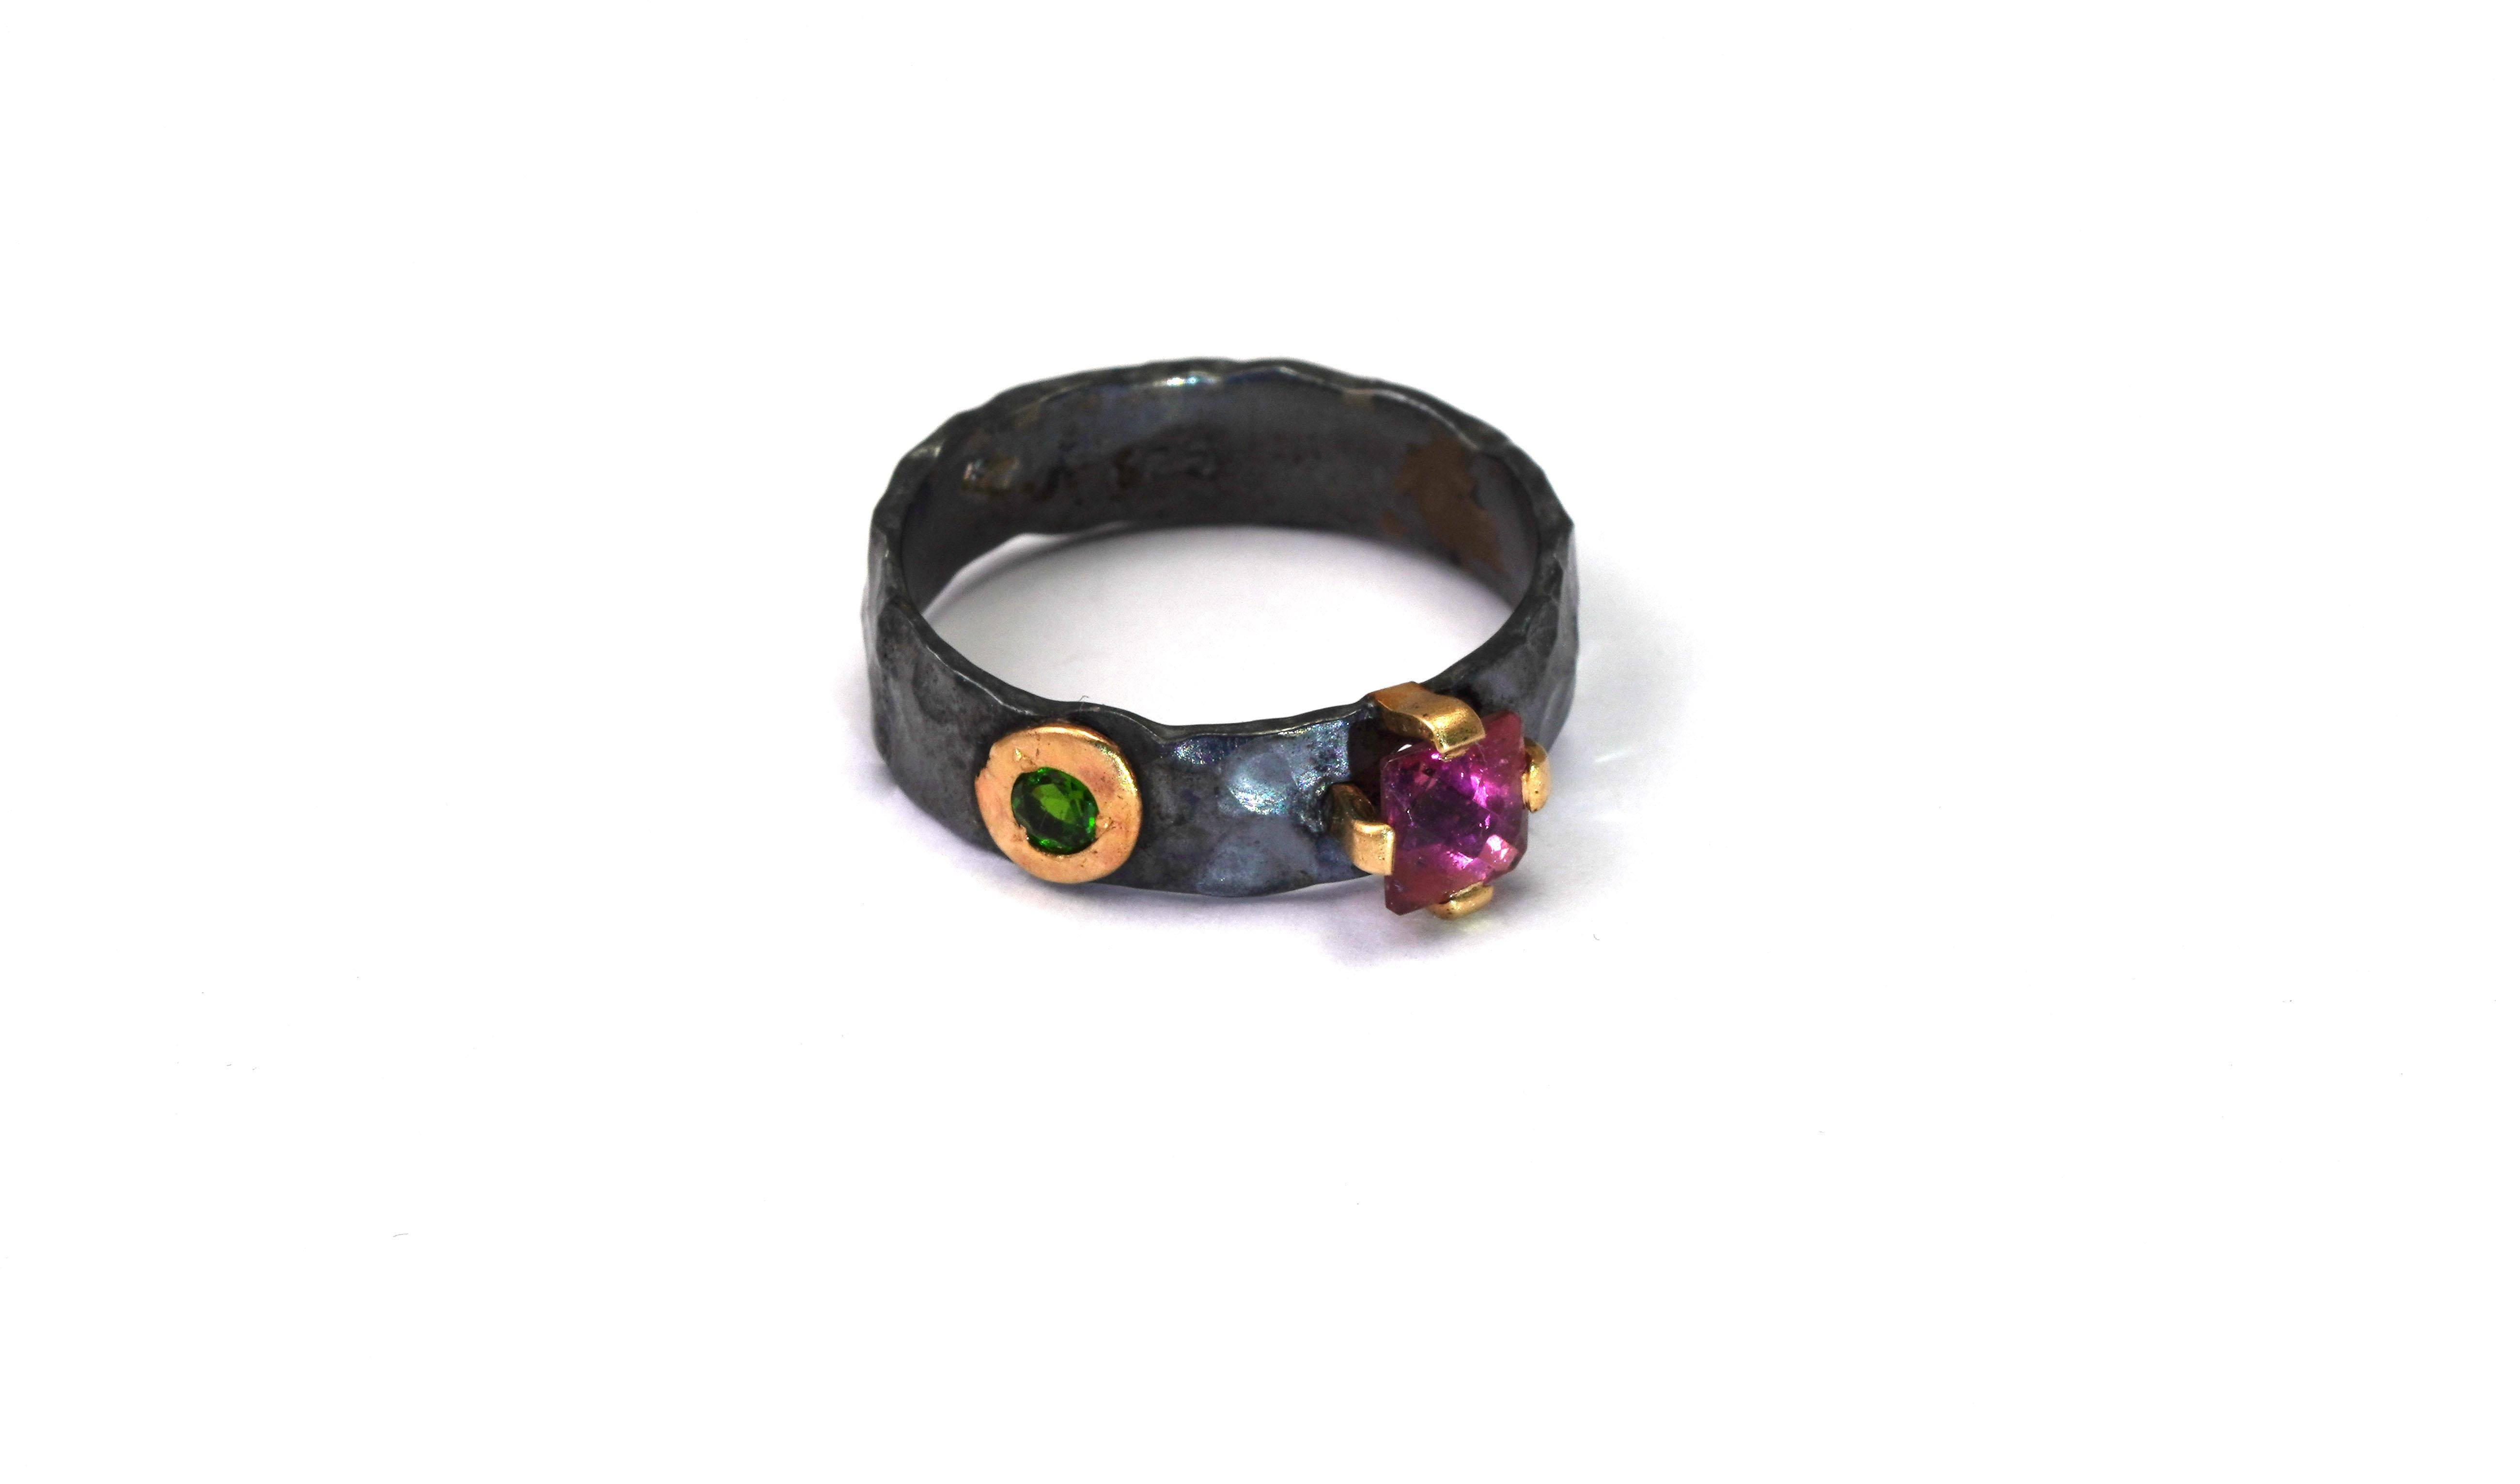 925 Oxidized Silver Ring with Tourmaline Rubellite and Green Tsavorite
Gold kt: Solid 18 kt 
Gold color: Yellow
Ring size: 5 1/4 US
Total weight: 2.70 grams

Set with:
- Tourmaline Rubellite
Cut: Mixed
Color: Red
- Green Tsavorite
Cut: